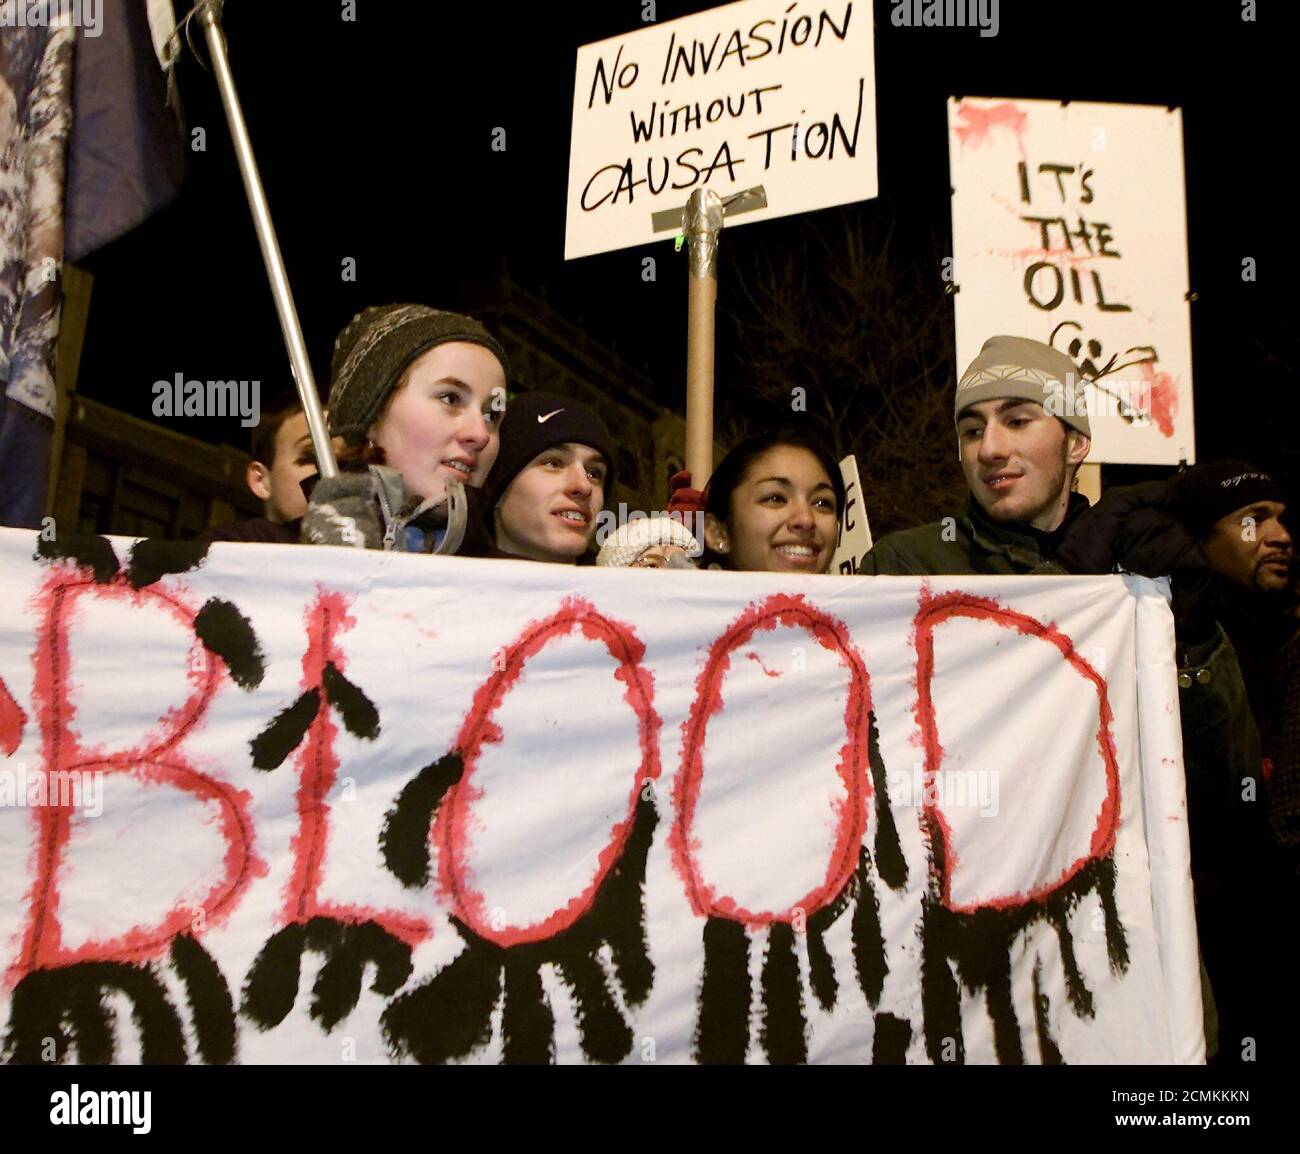 Protesters rally in Boston's Copley Square December 10, 2002 demonstrating against possible a United States military action against Iraq. The protest is one of more than 100 anti-war protest actions taking place across the United States timed to coincide with International Human Rights Day. REUTERS/Jim Bourg  JRB Stock Photo